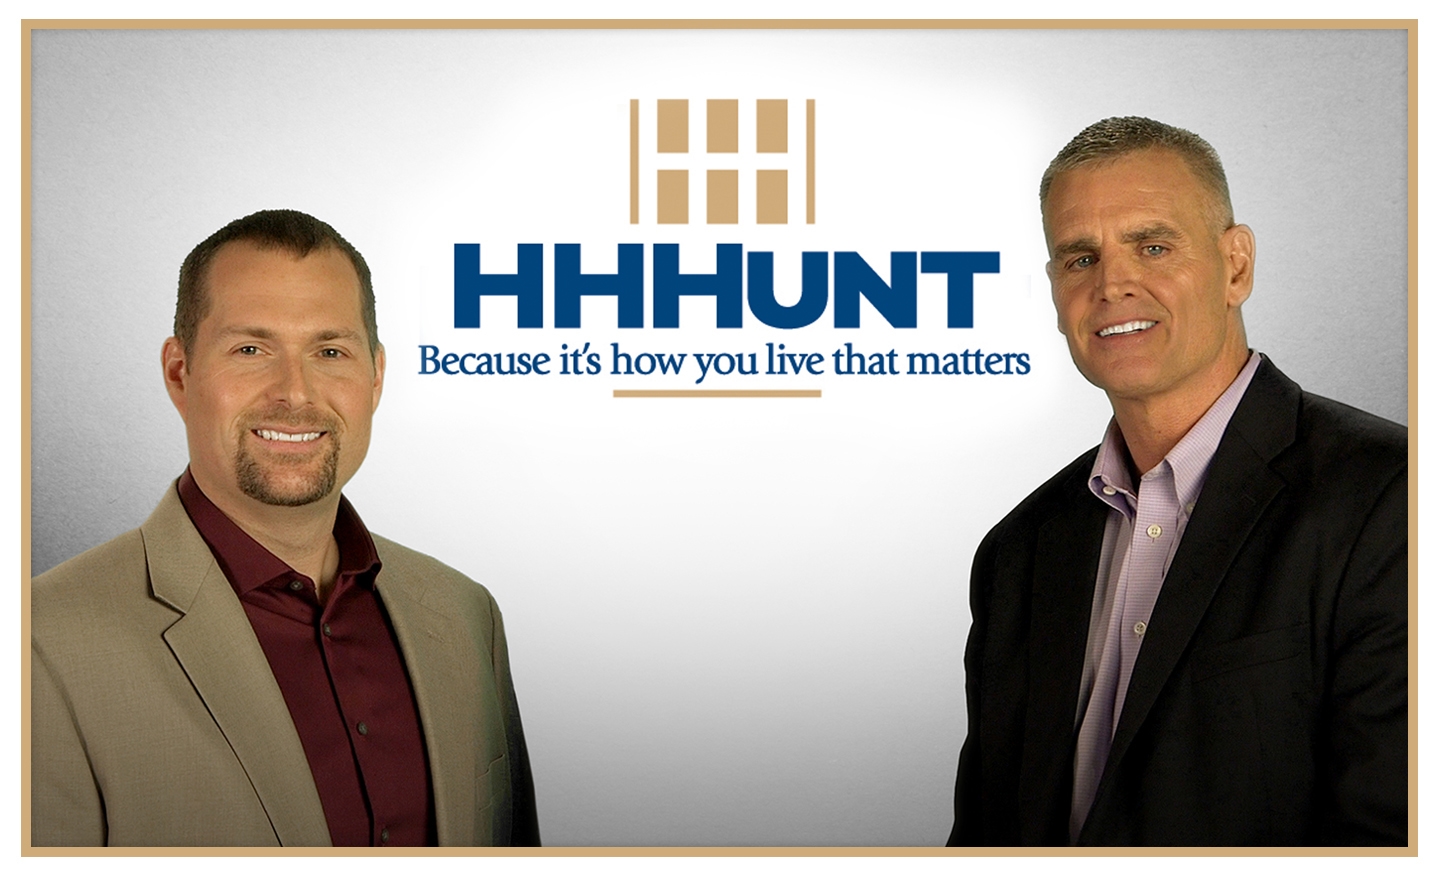 Pictured (l-r) Harry H. ("Buck") Hunt, IV Vice Chairman and CEO, Daniel T. ("Dan") Schmitt, President and COO